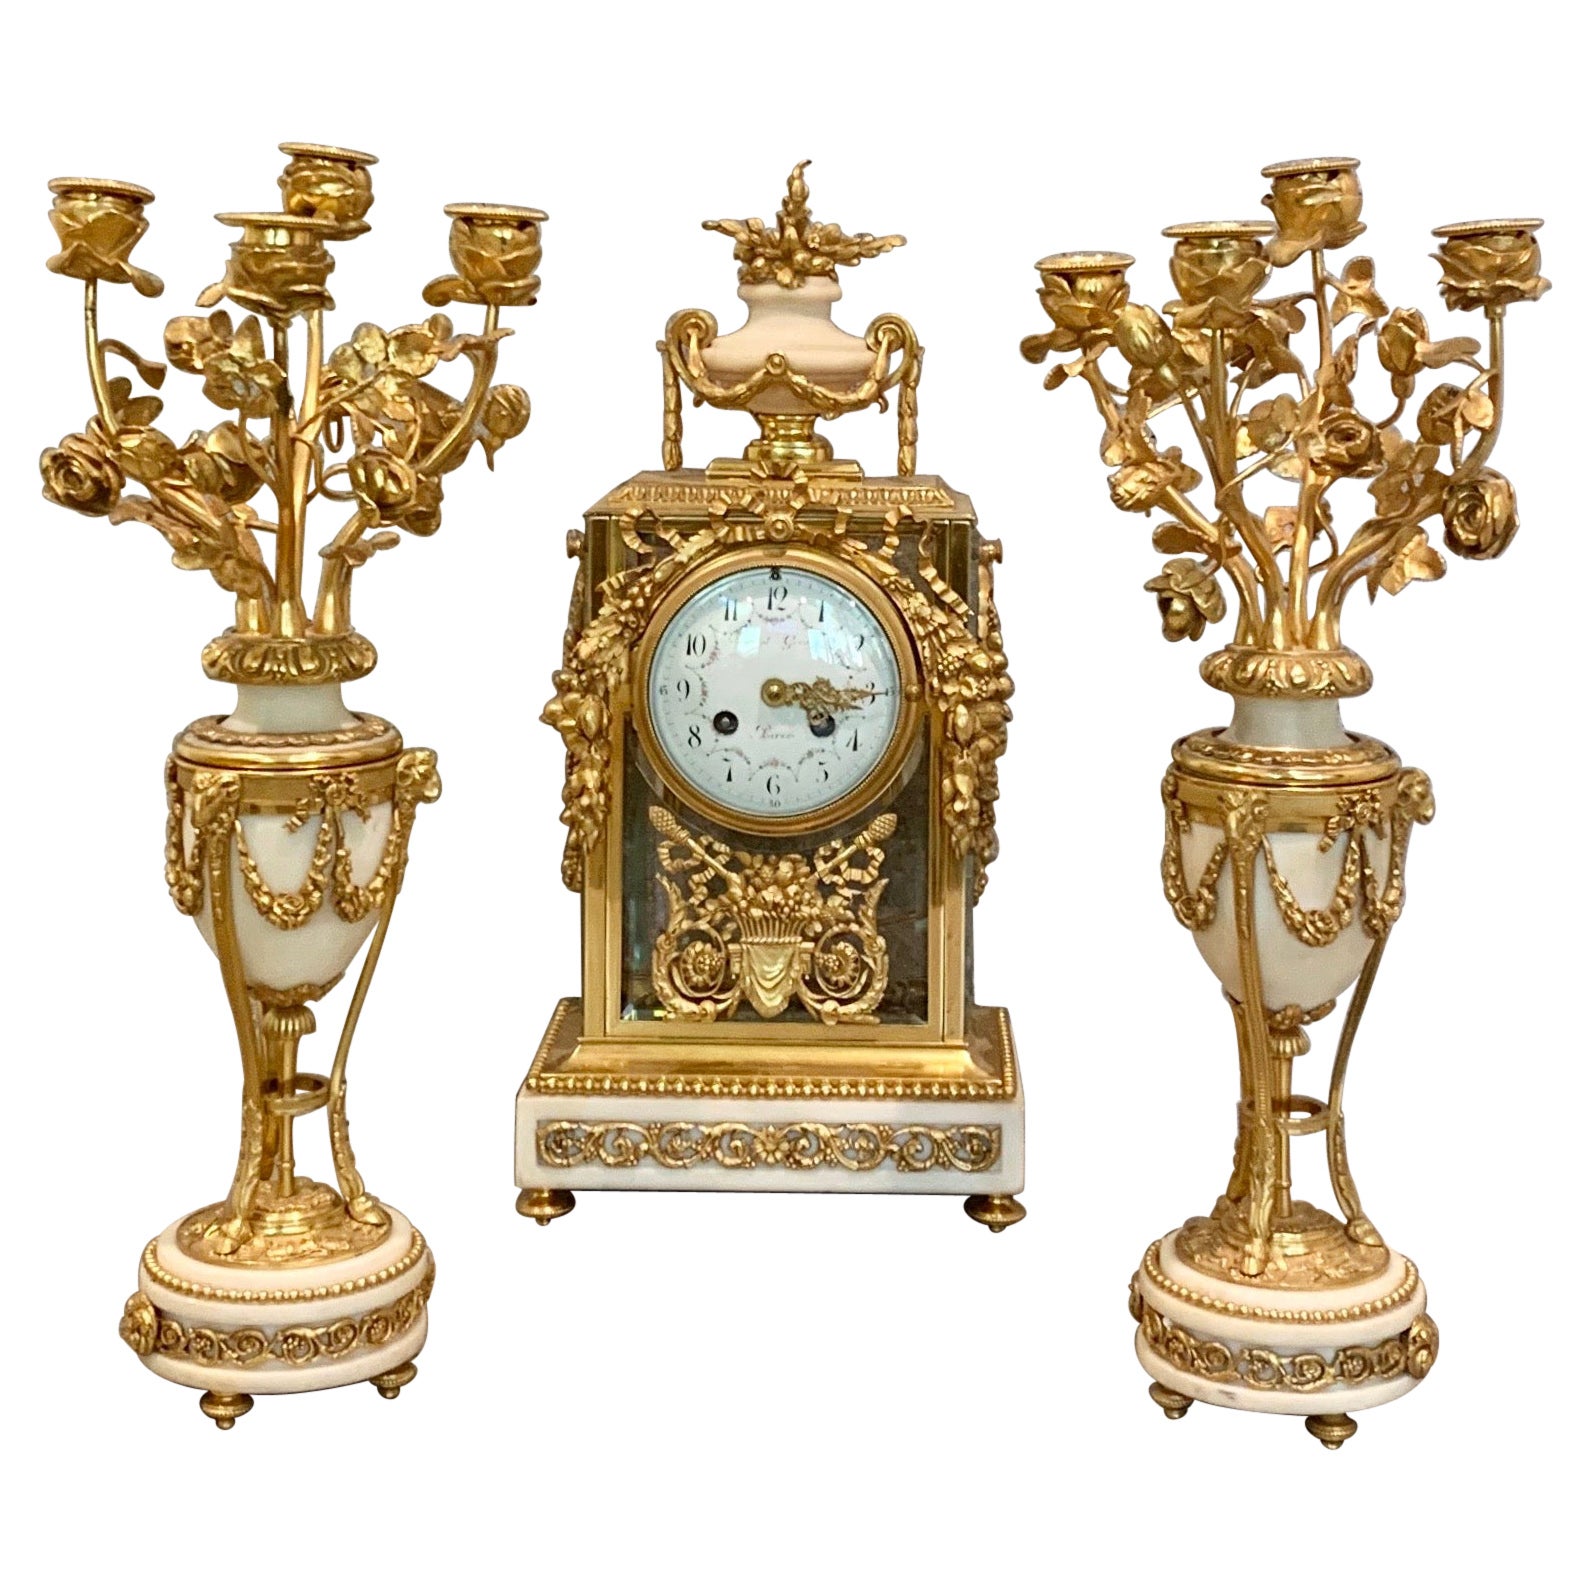 Fine French Gilt Bronze Four Glass Clock Set by Gerard, Paris Early 19th Century